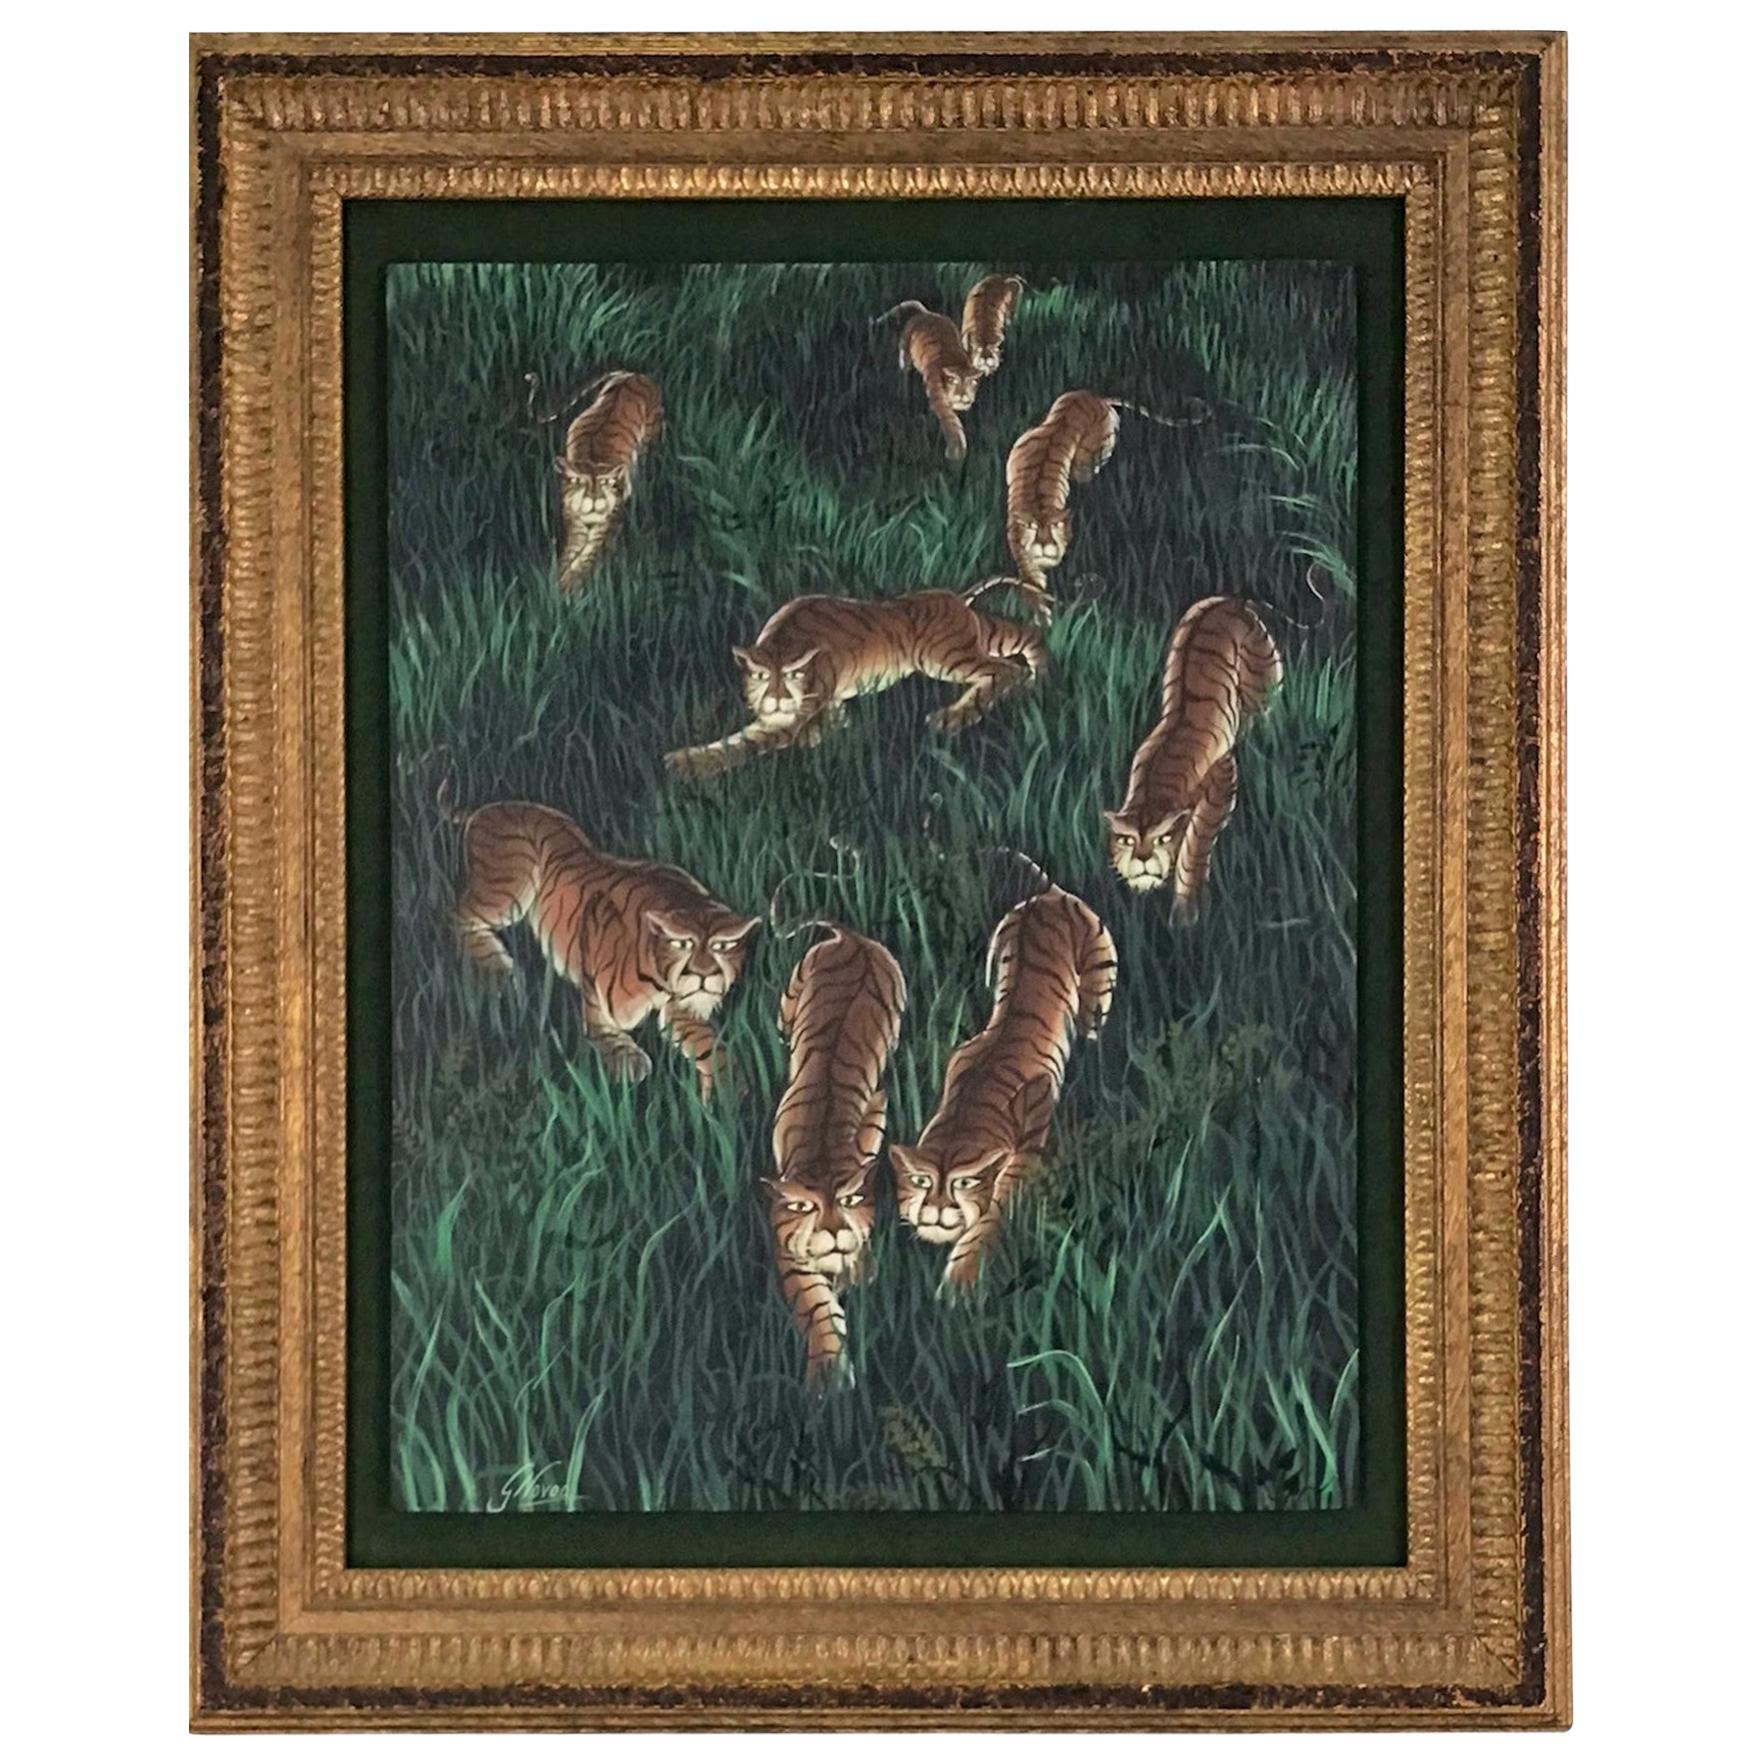 Gustavo Novoa Early 1960s Modern Naive Oil/Board Painting of a Group of Tigers